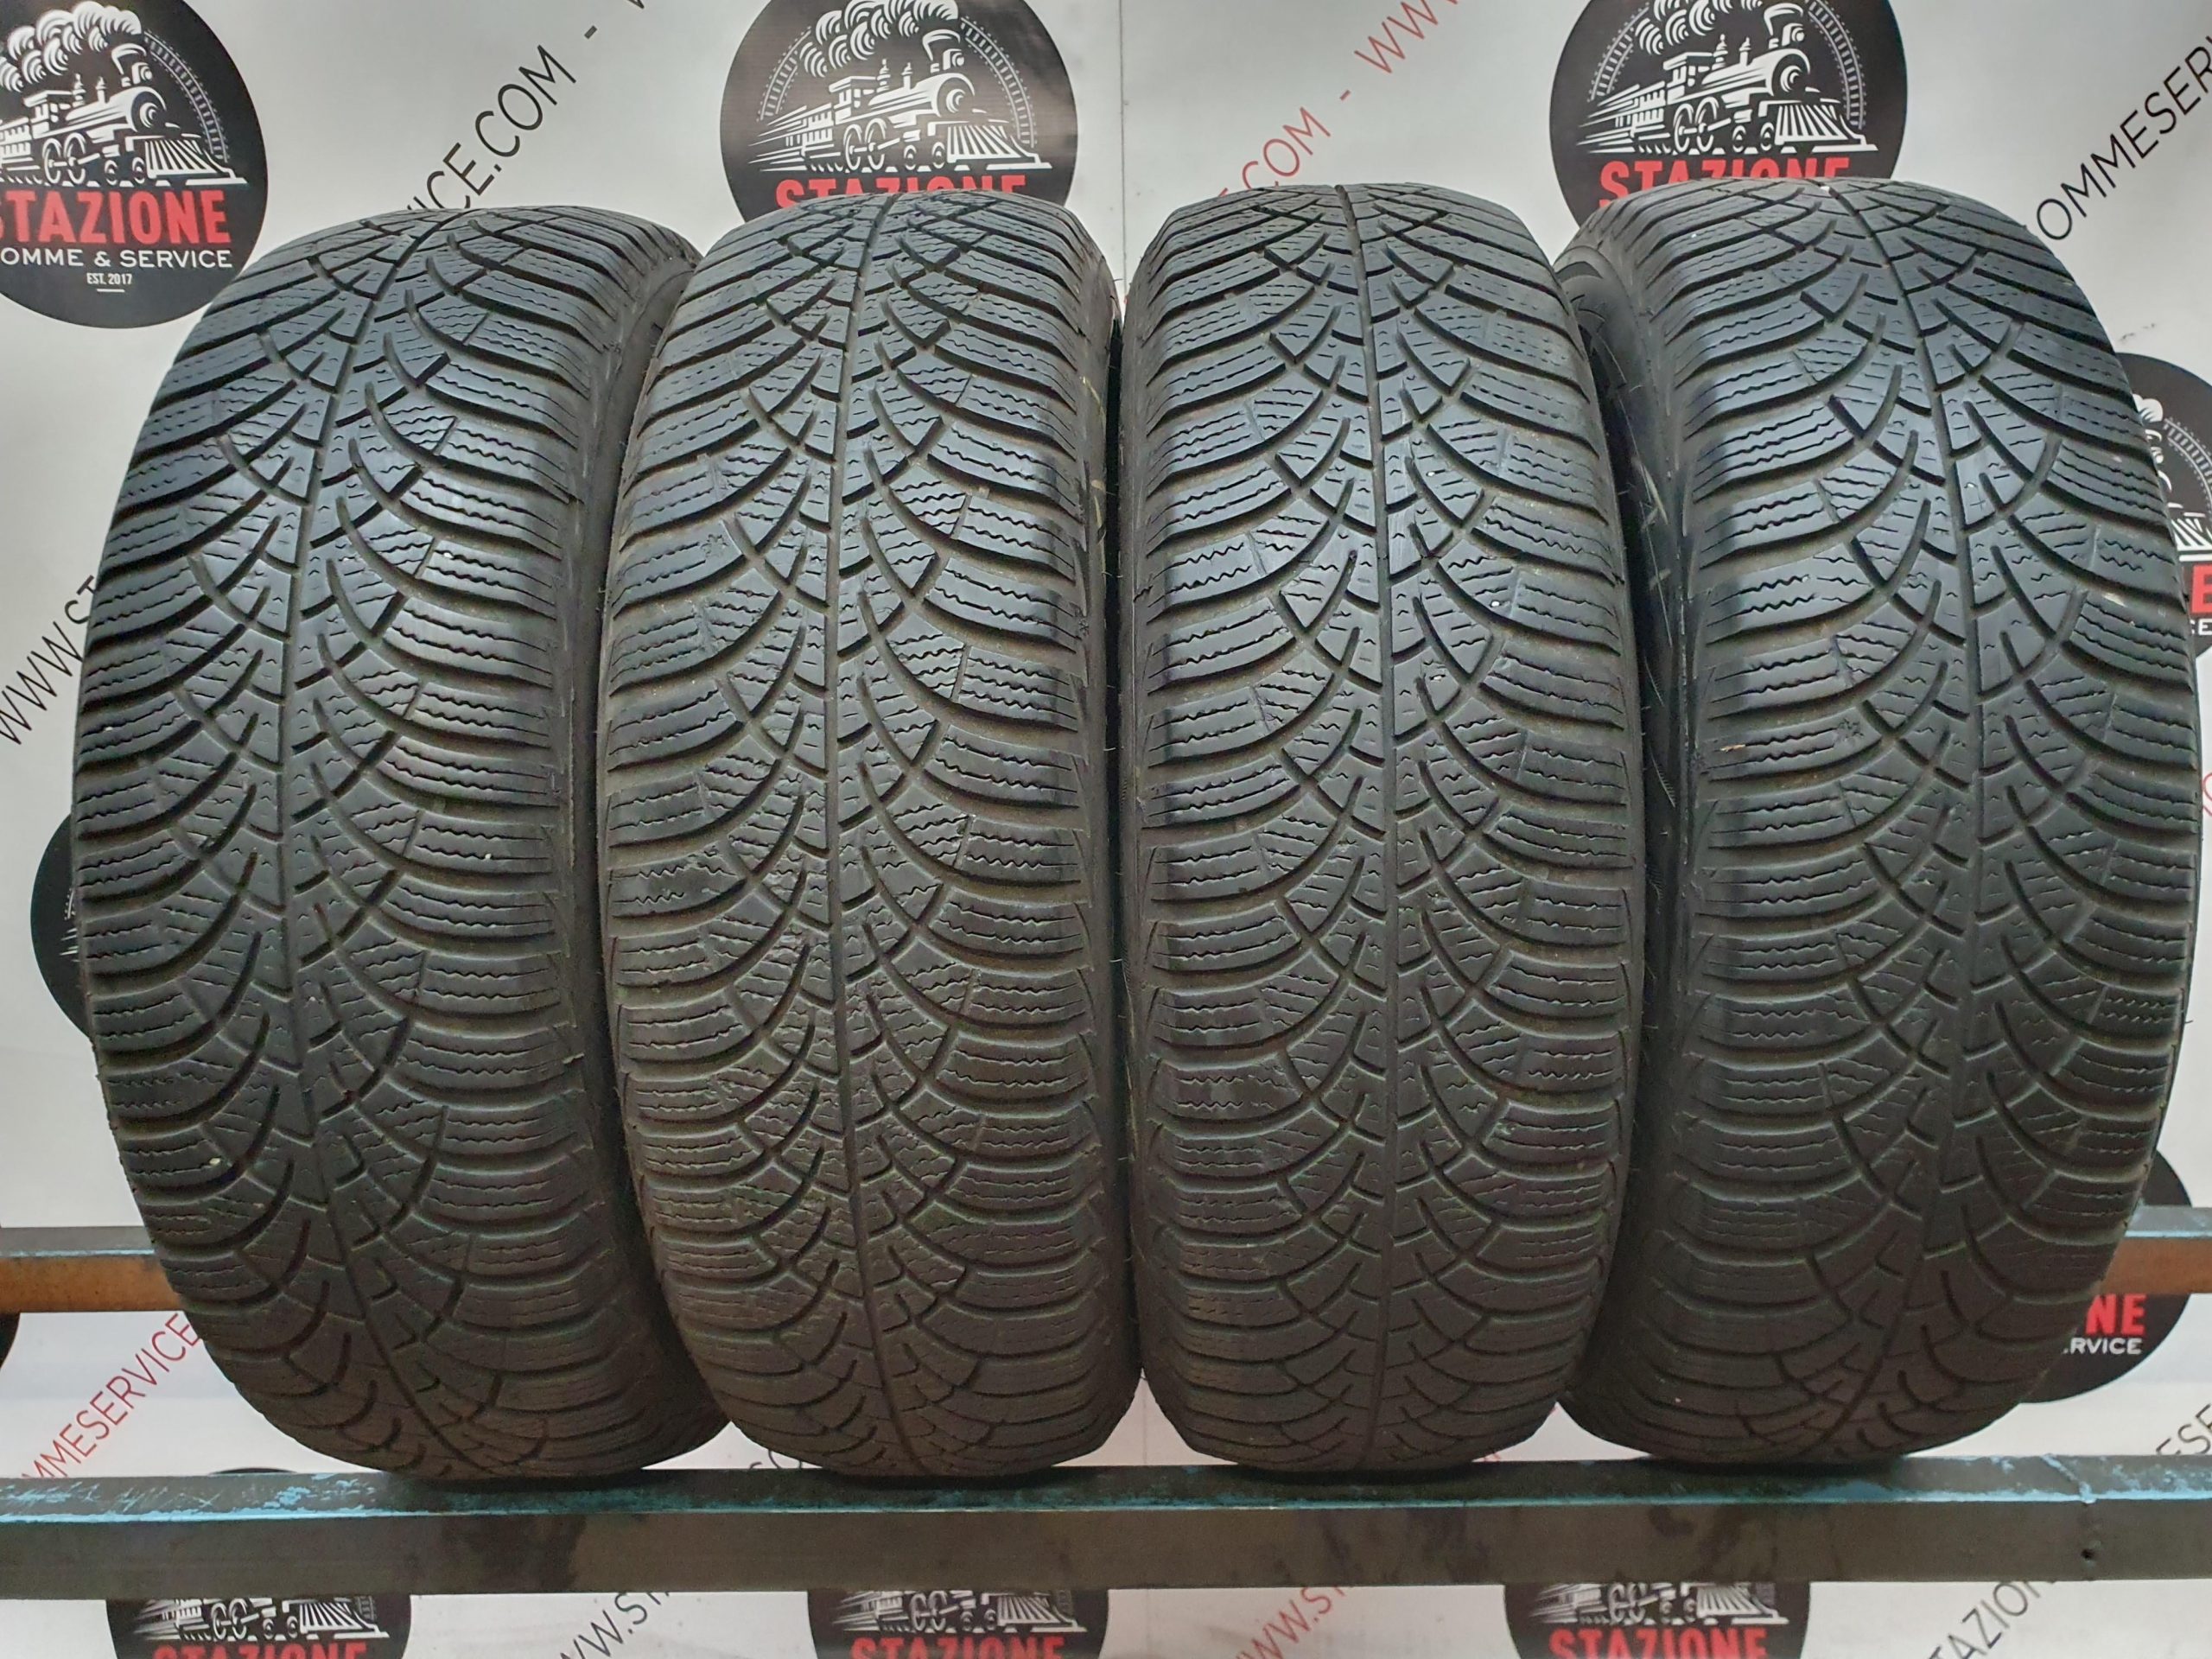 Gomme invernali usate GOODYEAR 185/65 R15 - Stazione Gomme Service